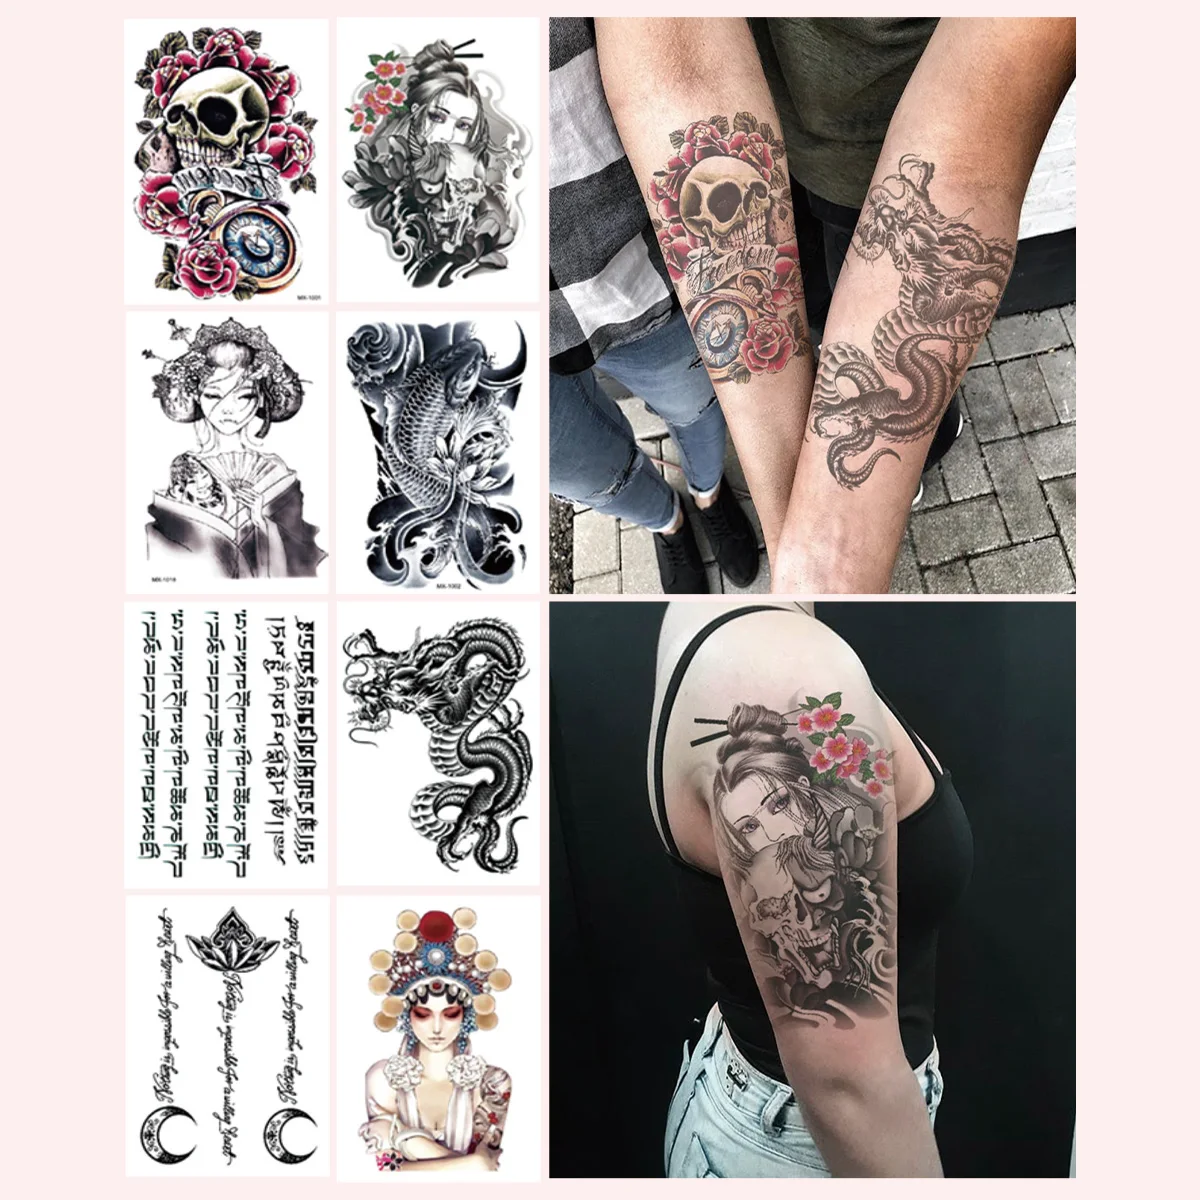 

10pcs Waterproof Temporary Tattoo Stickers With Skull Characters Moon Pattern Totem for Women Men's Arm Fake Tattoos Party Gifts